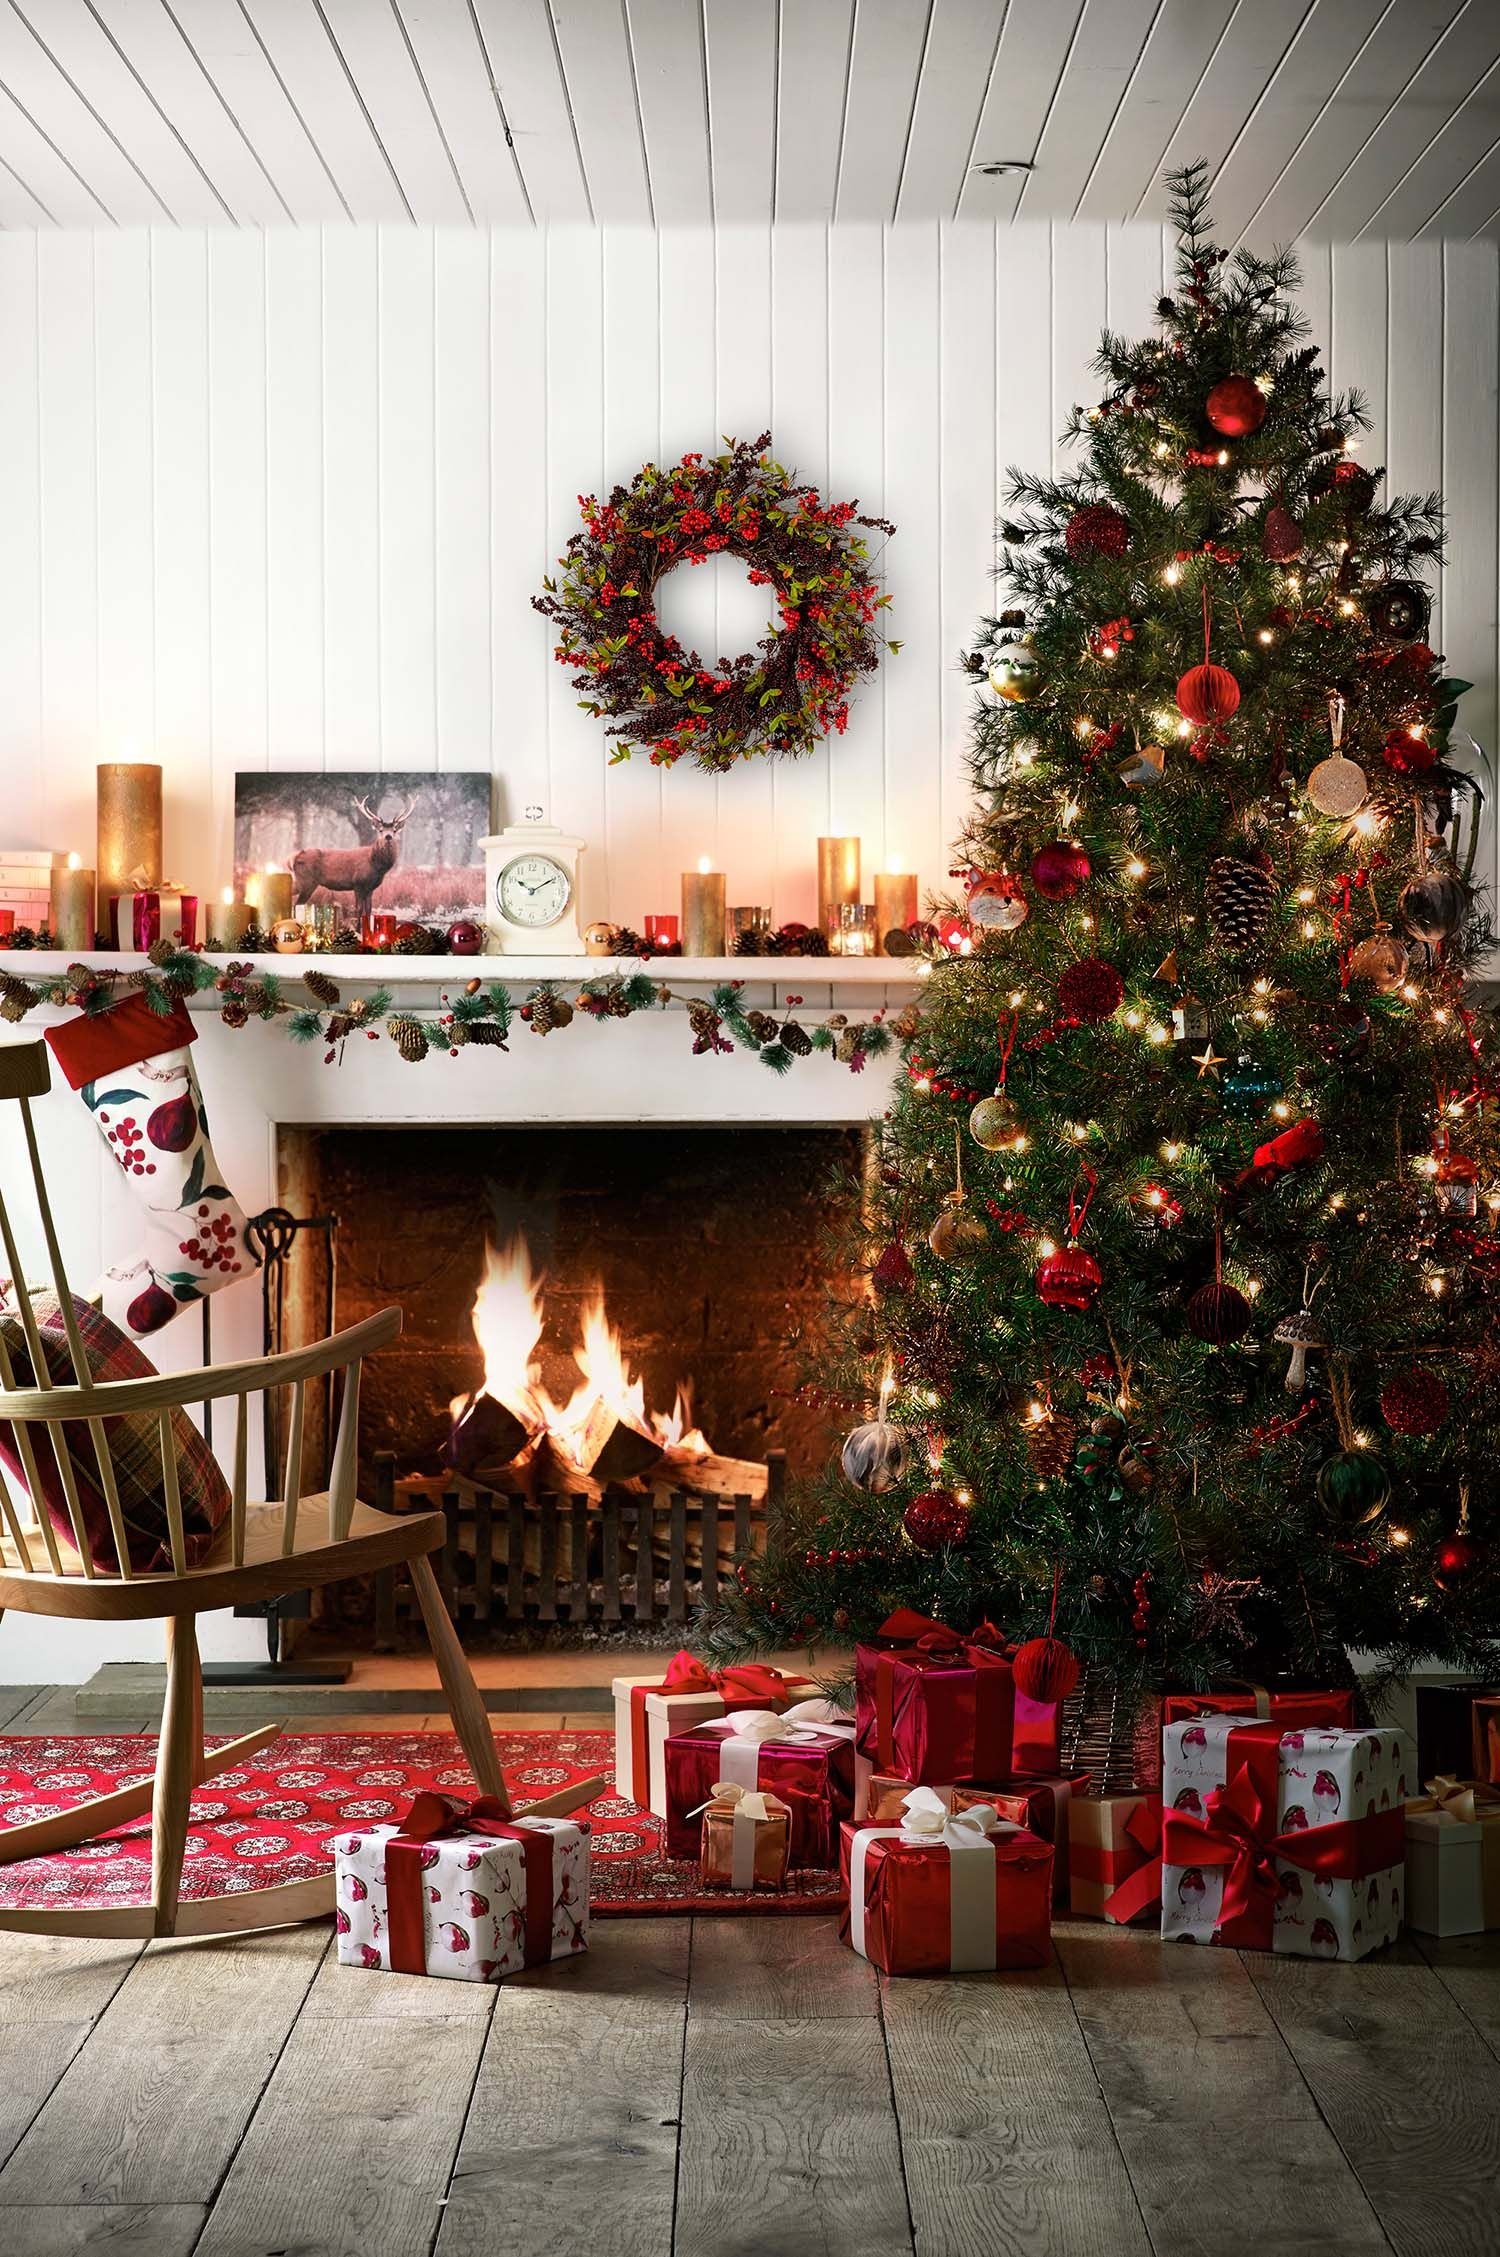 Rustic Fireplace with a Decorated Tree